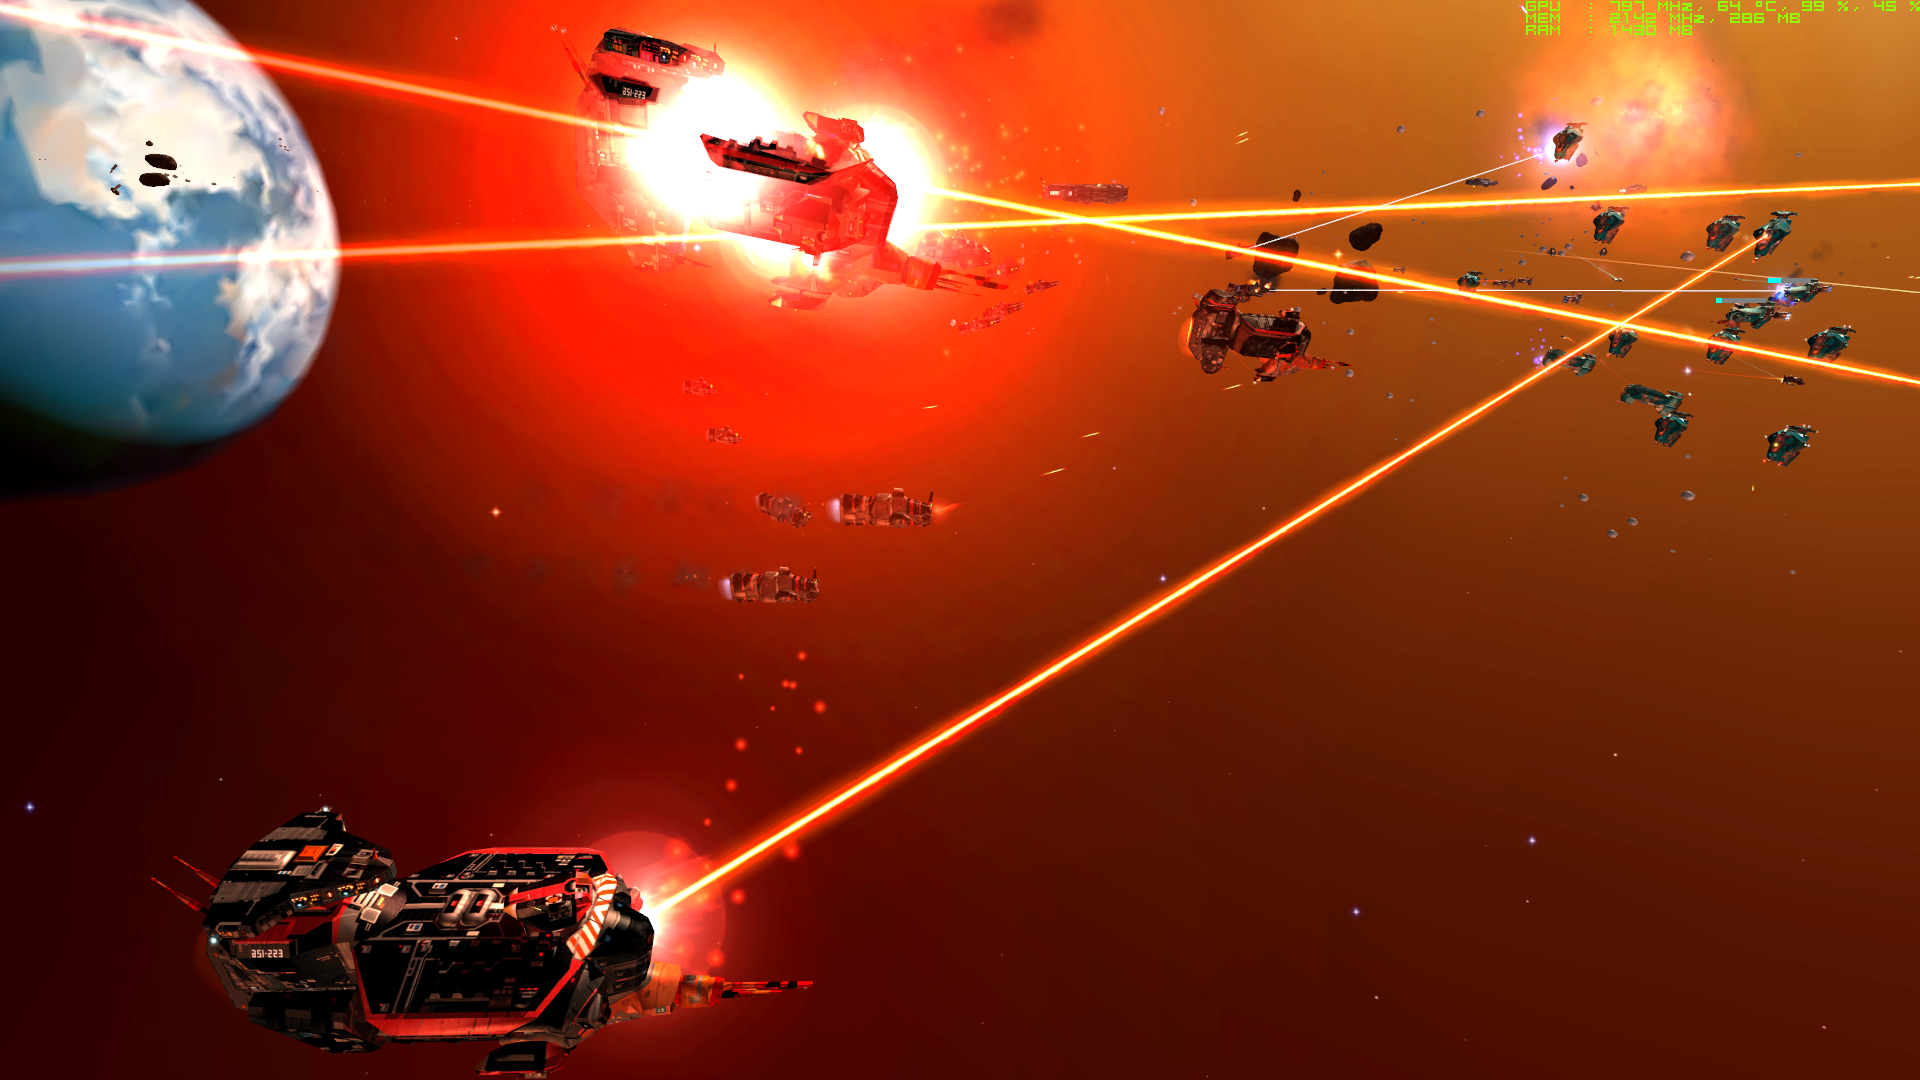 homeworld remastered collection